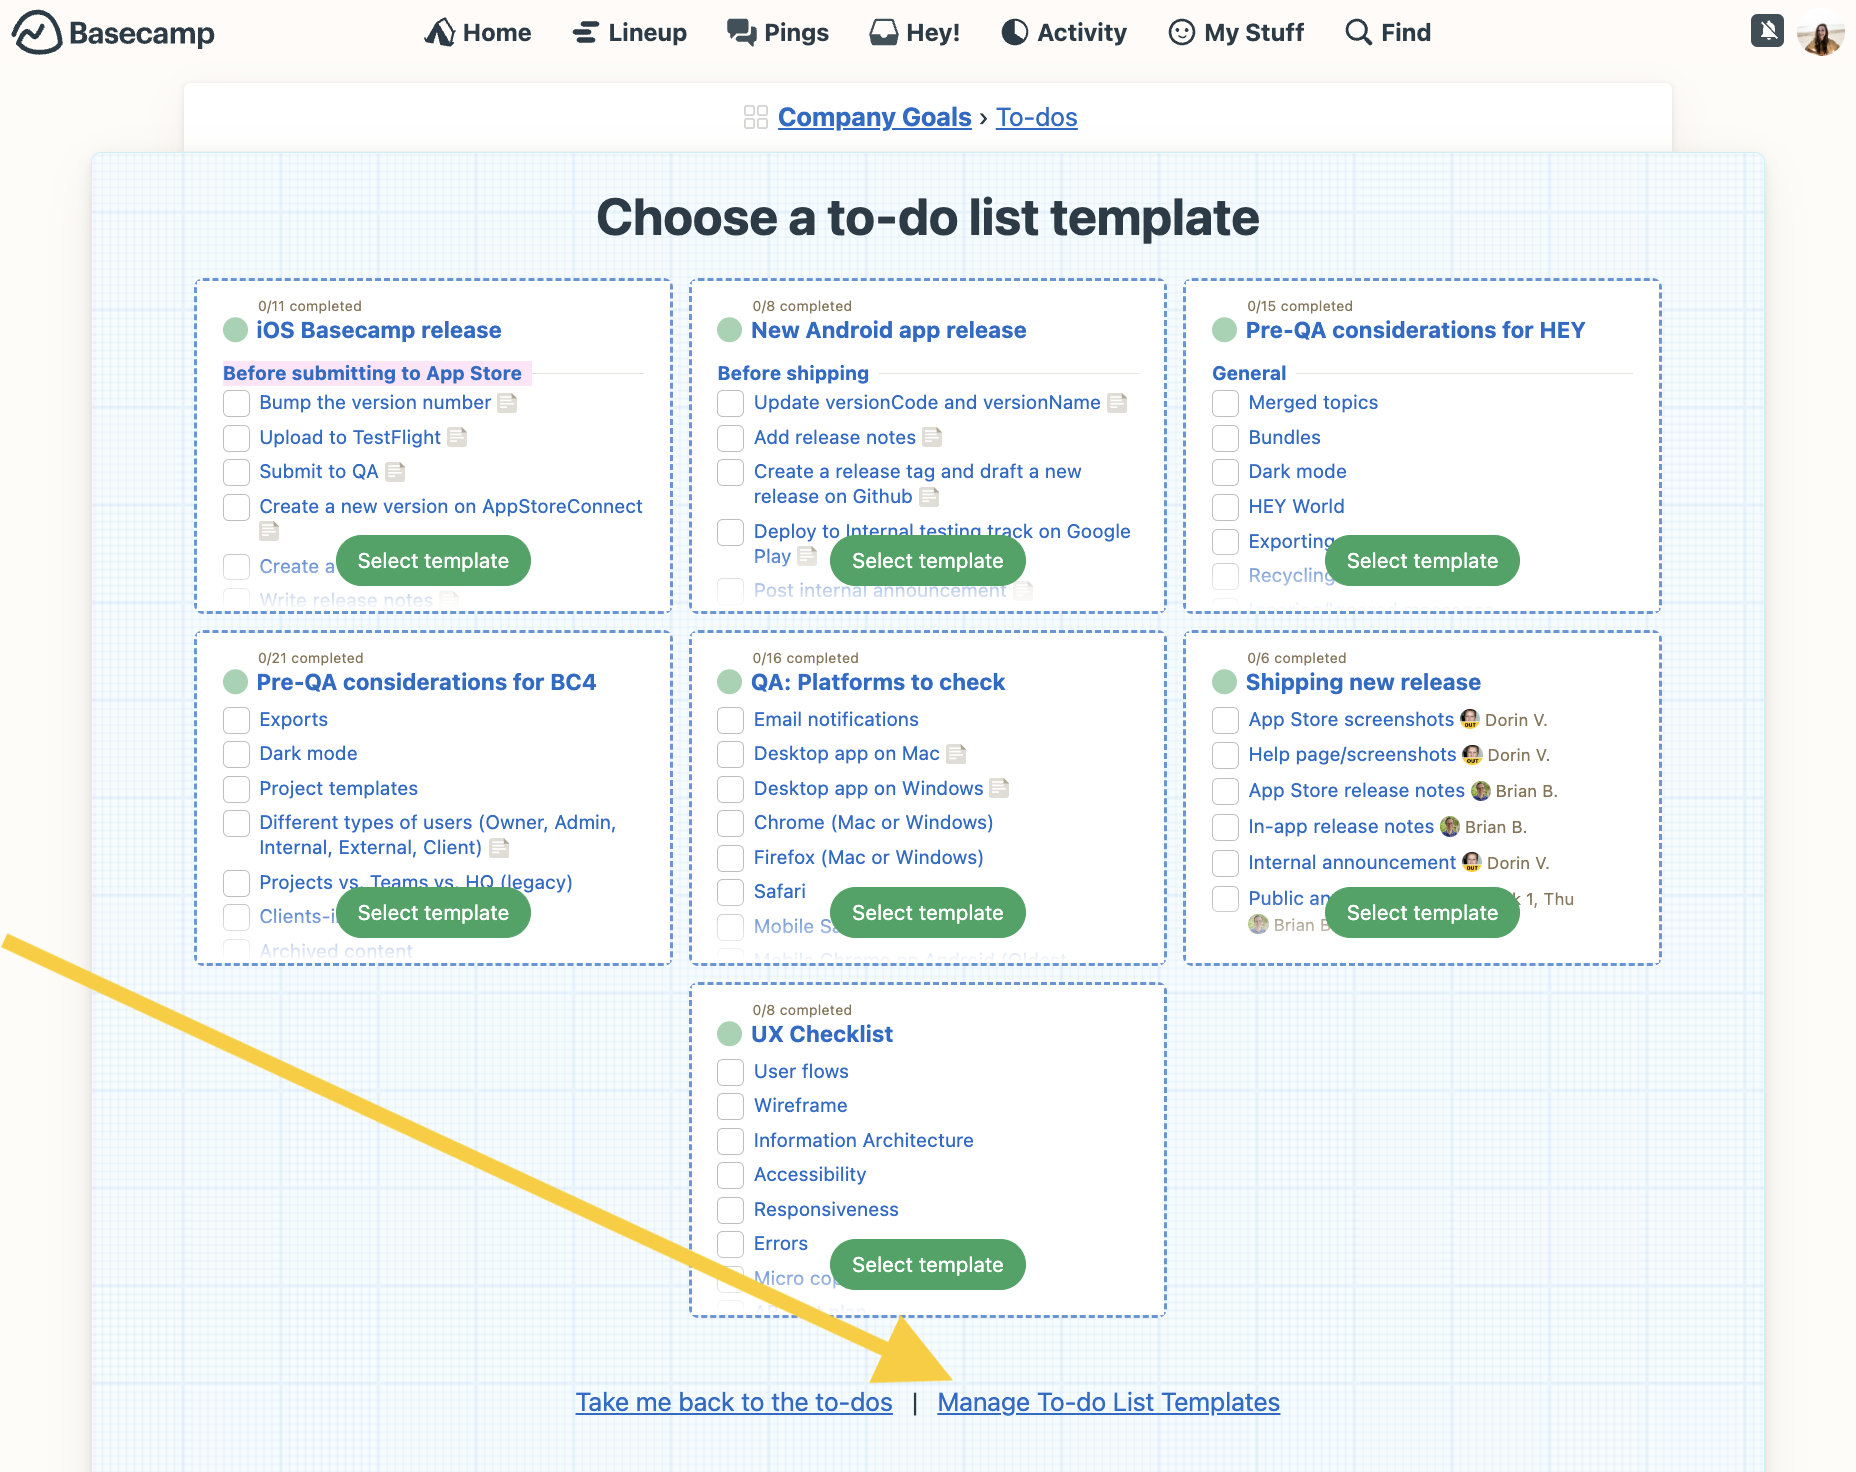 Where to find the option to Manage To-do List Templates in Basecamp.